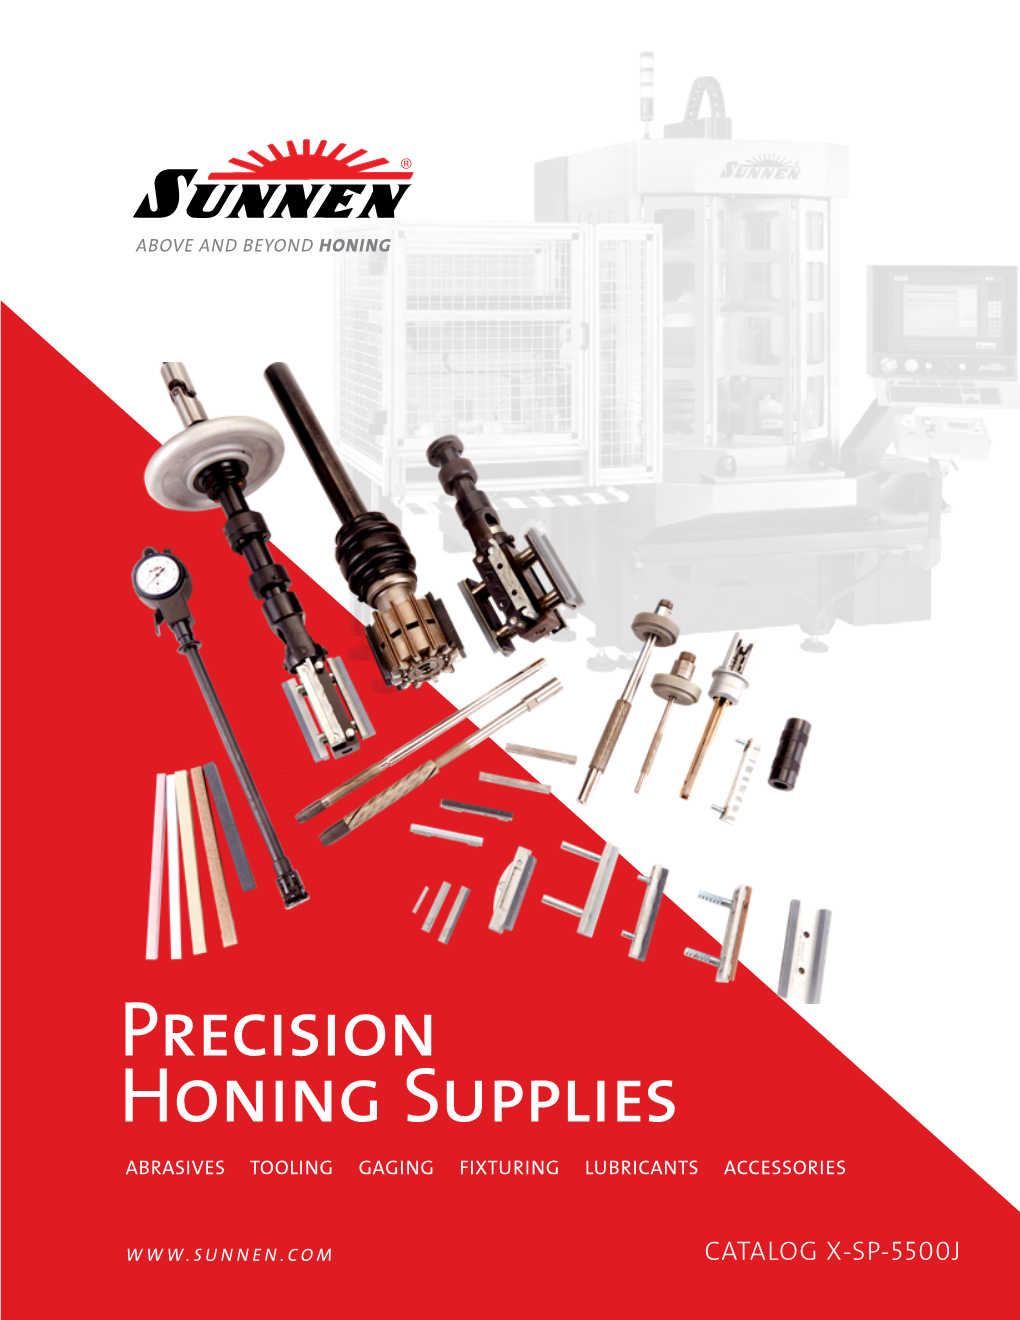 Precision Honing Supplies ABRASIVES TOOLING GAGING FIXTURING LUBRICANTS ACCESSORIES